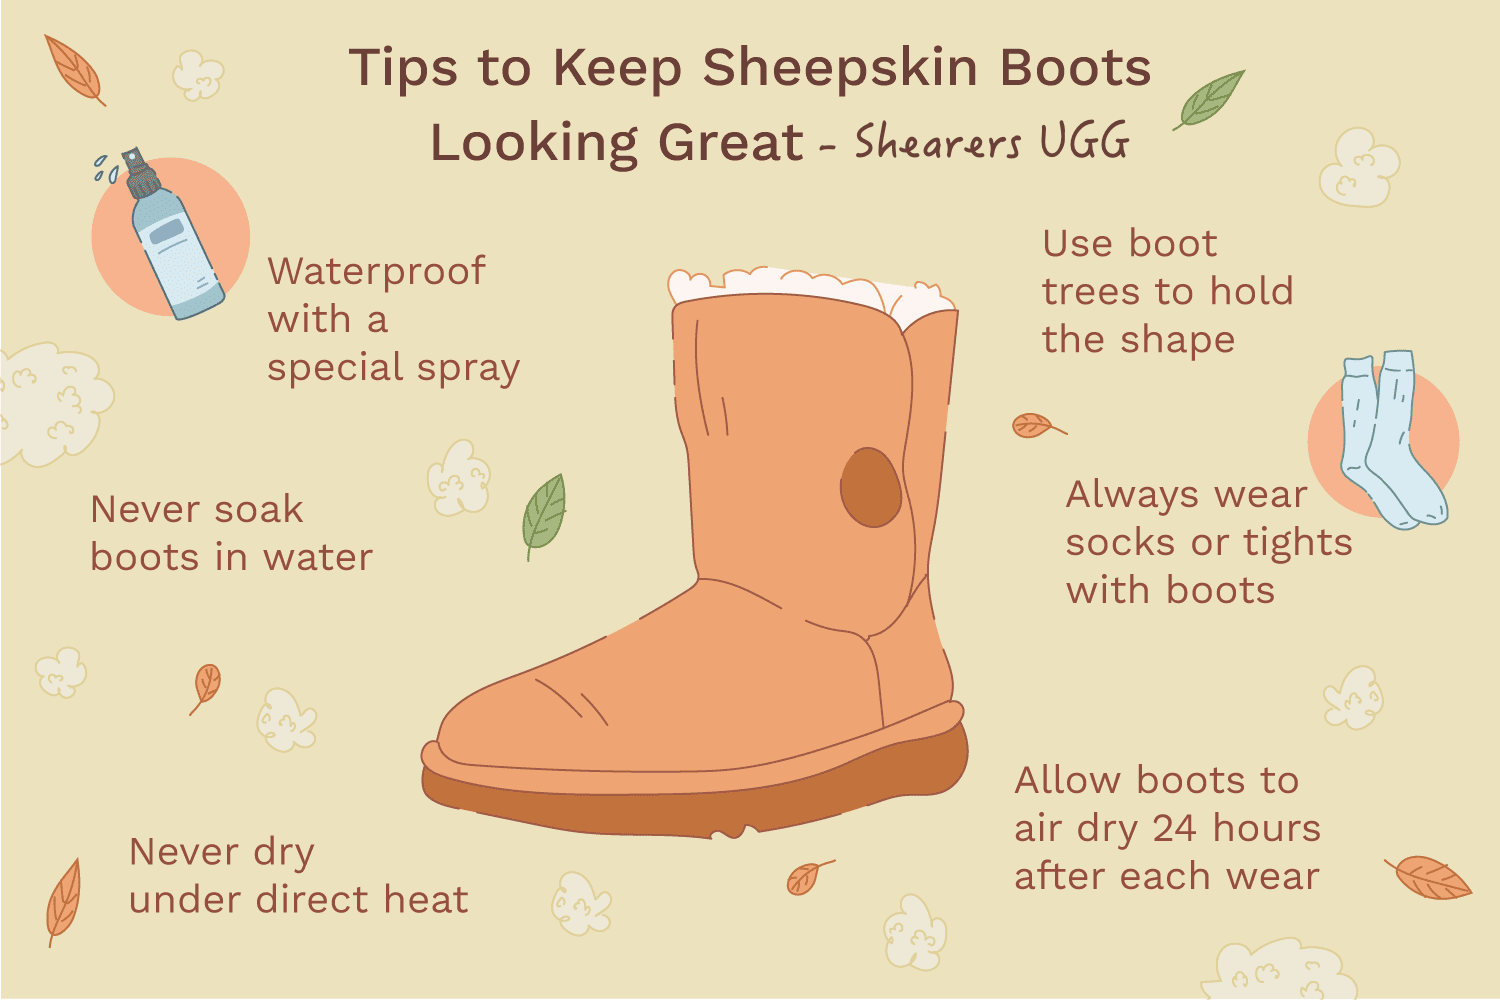 HOW TO CLEAN UGG BOOTS?  SHEARERS UGG